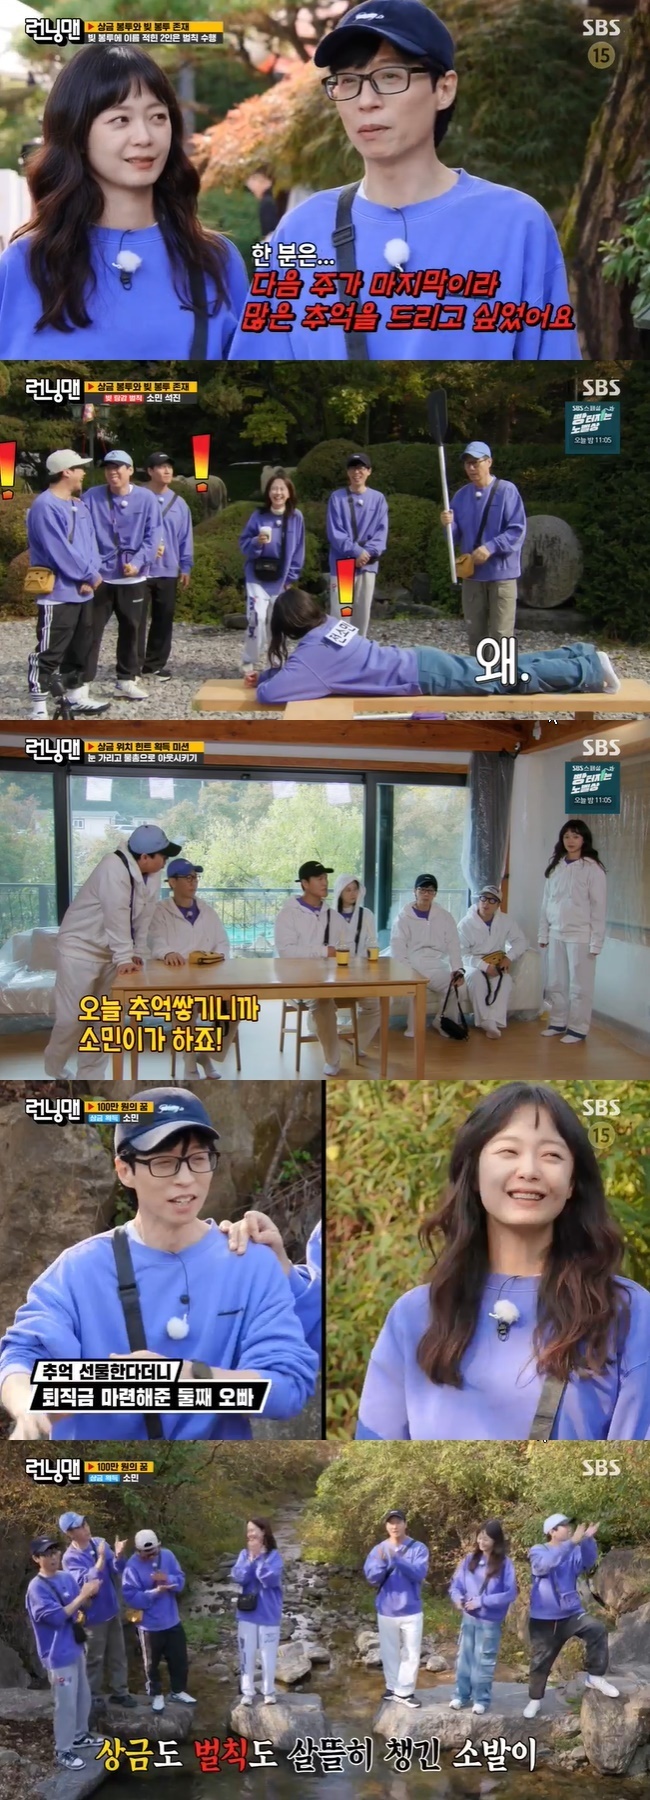  ⁇  Running Man ⁇  Members tried to make a lot of memories for Jeon So-min, who is just one time ahead of disjoint.On November 5, SBS  ⁇  Running Man  ⁇ , a dream race of  ⁇  million won was unfolded.On the day of the broadcast, members received a pre-rule to go to the kiosk when they arrived at the filming site on the way to work, to buy a pen, to find the hidden 1 million won prize Envelope and find their name.The first to arrive, Jeon So-min, Yang Se-chan, and Yoo Jae-suk received hints about the hidden place of Envelope provided to the top three.Yoo Jae-suk, who met Jeon So-min, said, What do you want to disjoint? In an article on the day of recording, Jeon So-min mentioned disjointing in six years.Yoo Jae-suk said, I knew it, but I was not feeling it.When Jeon So-min asked him to make Jasin the first place on the day, Yoo Jae-suk and Yang Se-chan joked, Its not possible.With Yoo Jae-Suk writing his name in the first Envelope, Ji Suk-jin arrived late, pointing out that Ji Suk-jin started recording early, and Haha said, How hard do you have to work?Yoo Jae-Suk also agreed that it was too empty because  ⁇ Jeon So-min was missing.Ji Suk-jin hoped to revise the decision, saying that it was not too late. When Yoo Jae-Suk said that the article had already been published, Ji Suk-jin relaxed that the article should be overturned.When Jeon So-min jokingly told Jasin to yield the hint, Yoo Jae-Suk pointed out that  ⁇ So Min actually needs 1 million won, and that fixed income is shrinking after disjoint.Haha said, I promise you this. I did not want to talk about money.On the other hand, Yoo Jae-Suk can not tell you the amount, but to some extent he promised you that we can lend you money, and Ji Suk-jin encouraged Yoo Jae-Suk to ask him to borrow up to 200,000 won. I made a fuss.The dream race of one million won was to find Envelope with one million won, write down the name with a disposable pen, and the person with the name in Envelope took the money.The members distributed the food taste step by step and guessed how many steps Jasin had, and proceeded to play a game to receive a running ball.Yoo Jae-Suk, Yang Se-chan, and Haha failed in the first stage of wasabi, and Yang Se-chan, Yoo Jae-Suk, and Haha did not get the correct answer in the second vinegar noodle.On the other hand, Ji Suk-jin was embarrassed by the fact that he had enough time to eat the last seven stages of vinegar.Haha, Song After Ji-hyo received a photo hint, members used their free time to find a million won envelope.While Song Ji-hyo and Yang Se-chan searched for Don Envelope in order and changed their names, Yoo Jae-Suk found a debt Envelope in which the person with the name on Envelope was penalized and wrote down the names of Jeon So-min and Ji Suk-jin.Yoo Jae-Suk said that he should give a lot of memories.Ji Suk-jin and Jeon So-min, who were selected as penalties, were put to shame according to the total amount of money spent by members.Ji Suk-jin was full of strength and relaxed, and Jeon So-min was nervous about calling her brother, but Ji Suk-jin reacted calmly, saying, Why?Yoo Jae-Suk laughed at the character saying that he hated the audience very much at the beginning, and thanks to both of them, the debt was forgiven.Next, within three minutes of the time limit, a zombie in the role of a tongue wore an eye patch and shot the remaining members with a water gun to play In-N-Out Burger.When I tried to set my first tongue, Yang Se-chan was so memorable that So Min was driving me.Jeon So-min, who became a tongue, made Kim Jong-kook an In-N-Out Burger, and Haha hit four shots on Ji Suk-jins face,Ji Suk-jin, who was vengeful, blackened that the children who did not play fair like  ⁇  Haha died and went to hell, and interfered with the game by sharing the members positions with Kim Jong-kook.In the final round, Ji Suk-jin eventually won the tag, but ended without seeing the person.During the second free time, Yang Se-chan bought pork belly, ssam vegetables, etc., exceeding 800,000 won, and the penalty for entering the valley was confirmed.After completing all the Game, Jeon So-min and Yang Se-chan were decided to be the recipients, and Yoo Jae-Suk became the main character of the last 1 million won Envelope and won the prize money.However, Yoo Jae-Suk wrote down the name of Jeon So-min instead of Jasins name on Envelope, saying that Yoo Jae-Suk needs money for  ⁇ So Min to come forward.When I joked that I had to have money to go to the festival, Jeon So-min replied that it was okay for a year, but I changed the prize money and penalties at the same time.Jeon So-min shouted with Yang Se-chan, Everything is a memory. Ji Suk-jin regretted the disjoint, saying, There is nothing to do now.